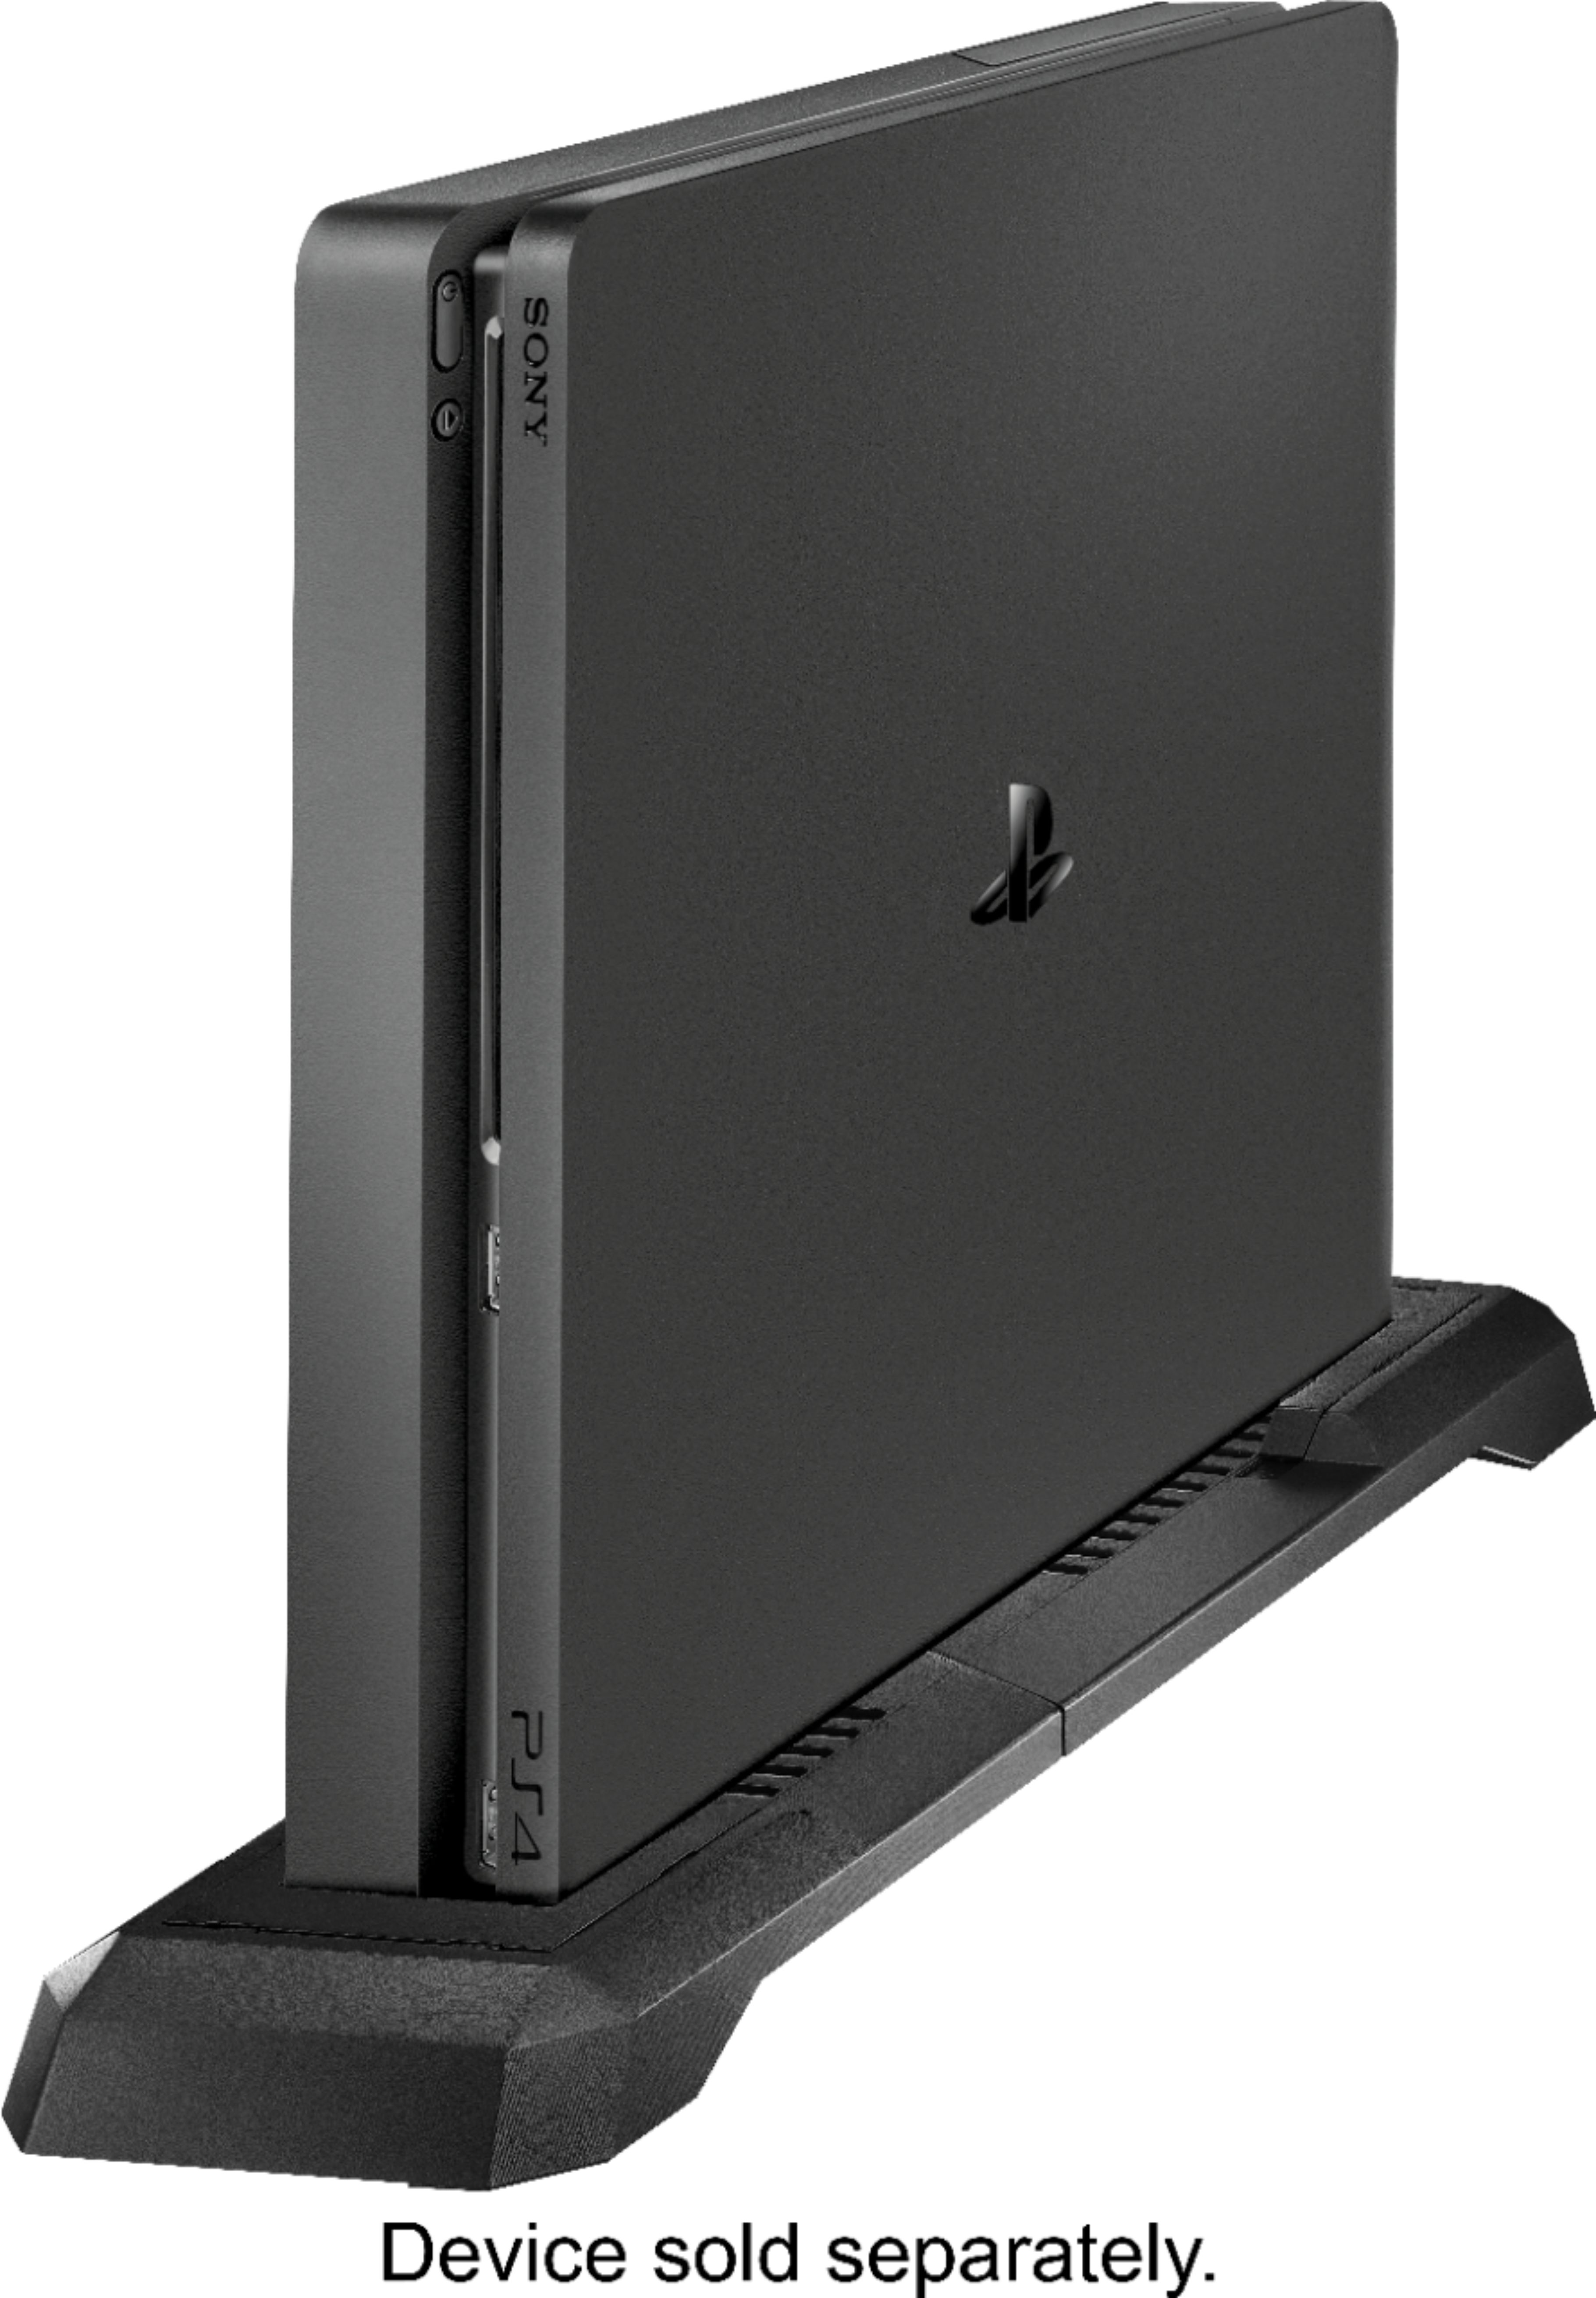 ps4 upright stand